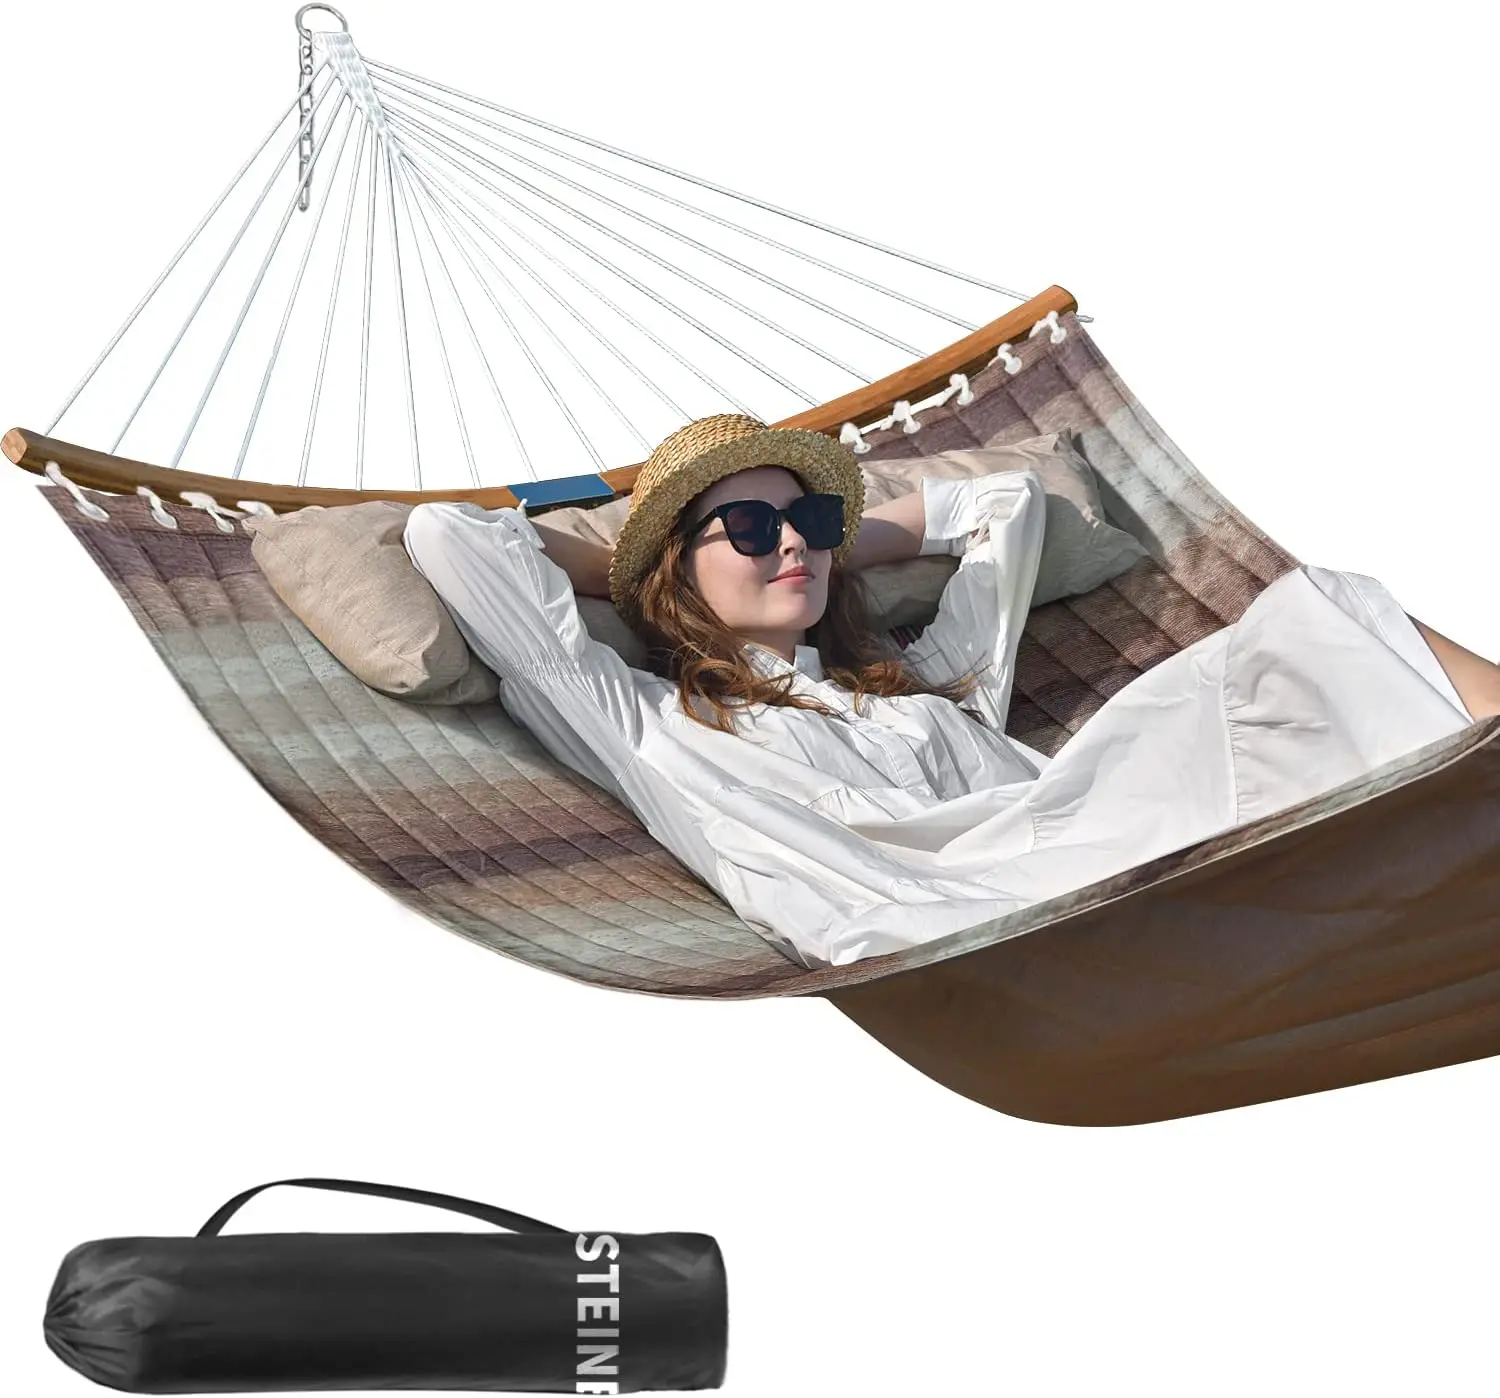 

POPTOP Double Hammock, 11 FT Quilted Fabric 2 Person Hammock for Outside with Pillow, Folding Spreader , Chains, Carrying Bag,